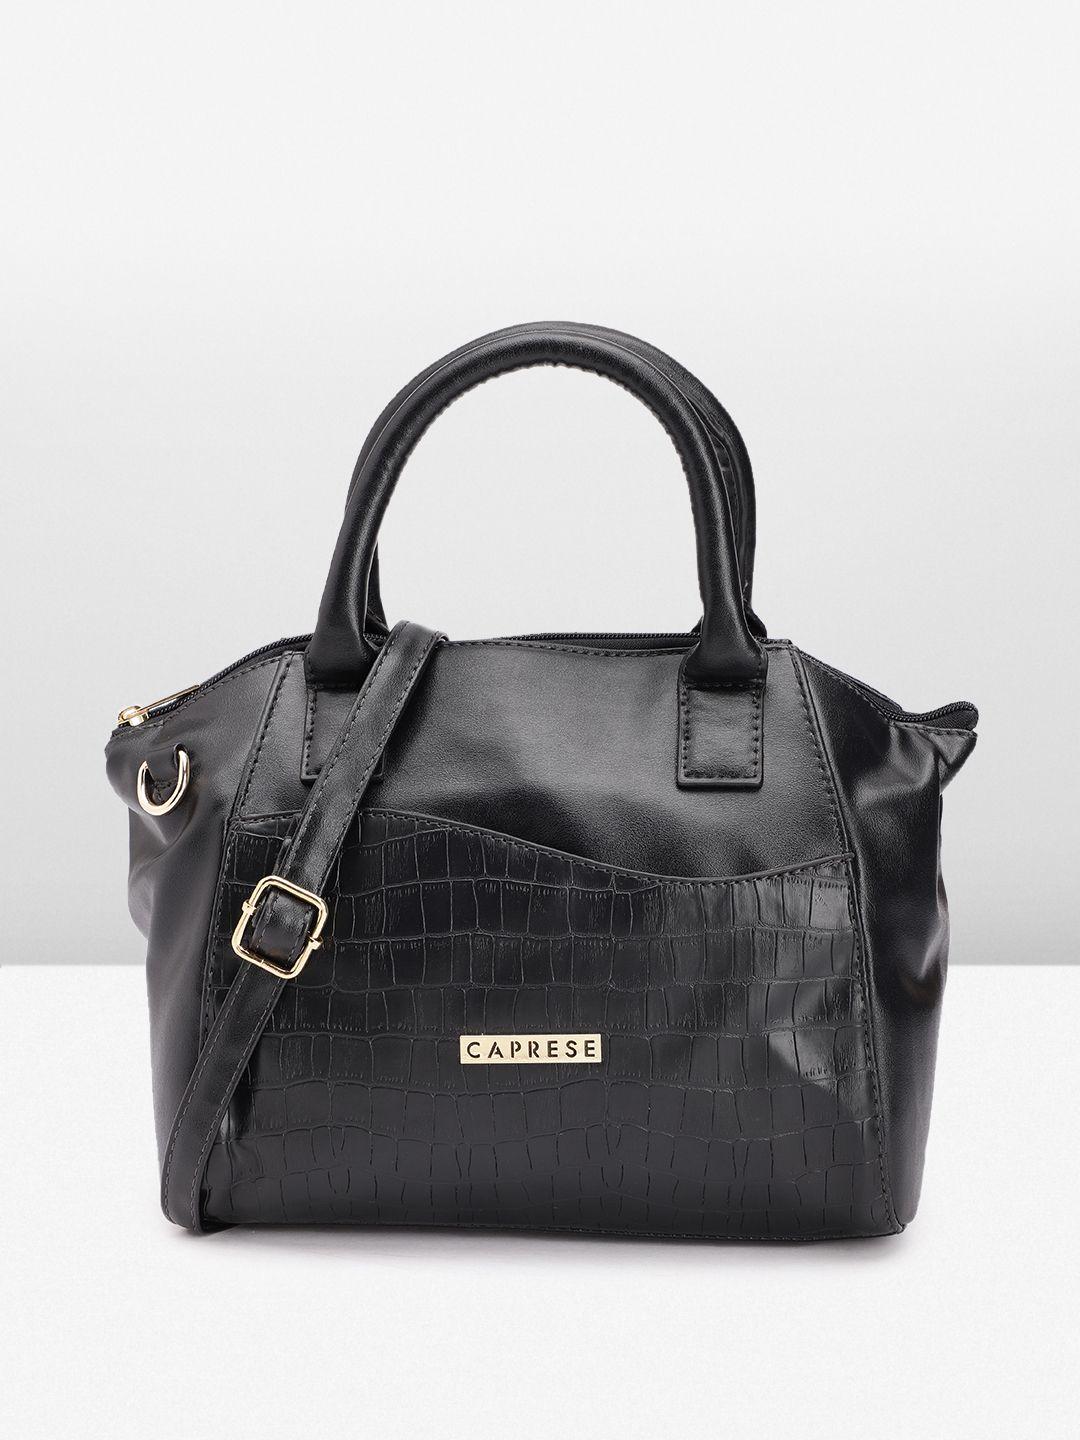 caprese solid structured handheld bag with minimal crocodile textured detail